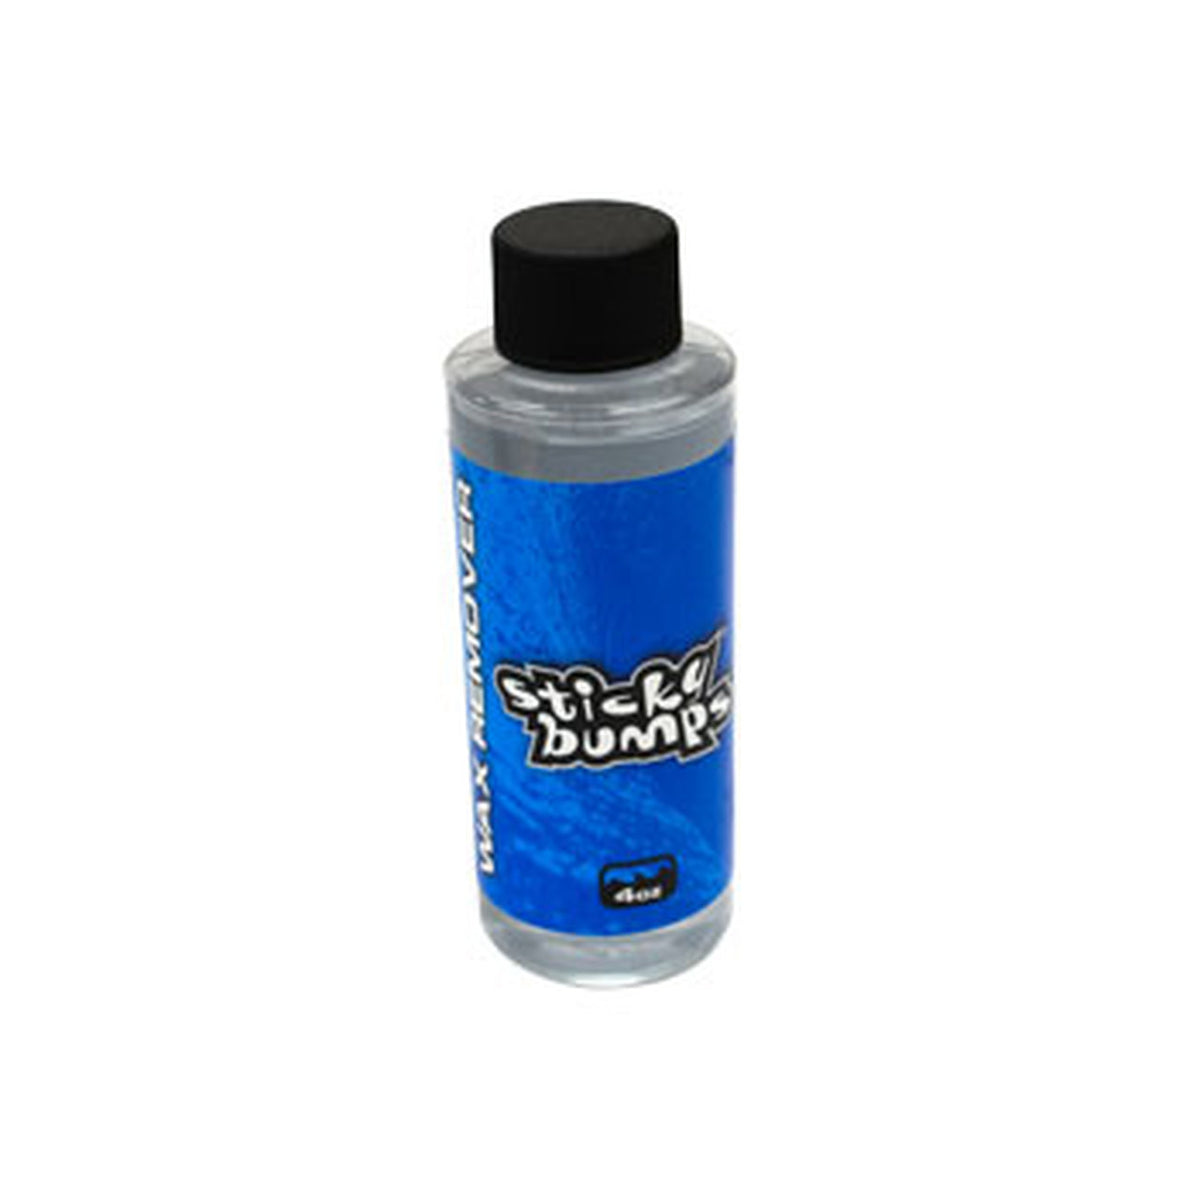 STICKY BUMPS WAX REMOVER